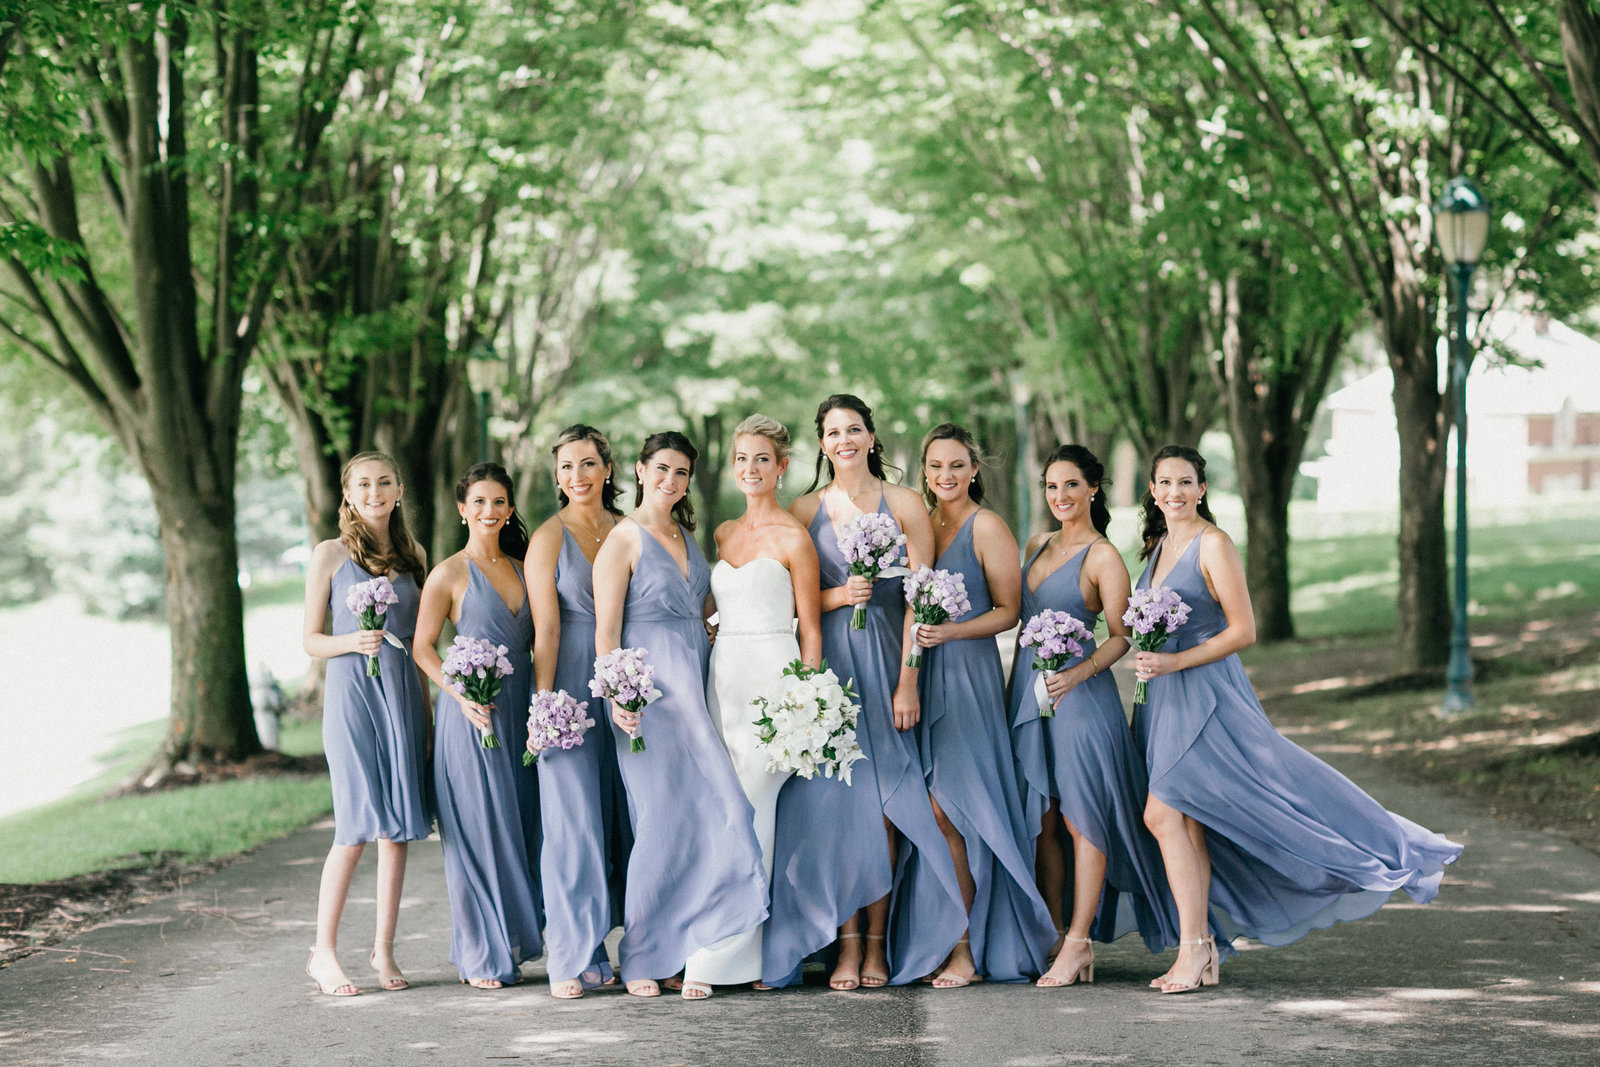 Our bride Jessica, gathered around by her bridesmaids at Overbrook Golf Club wedding venue  in Villanova, PA.